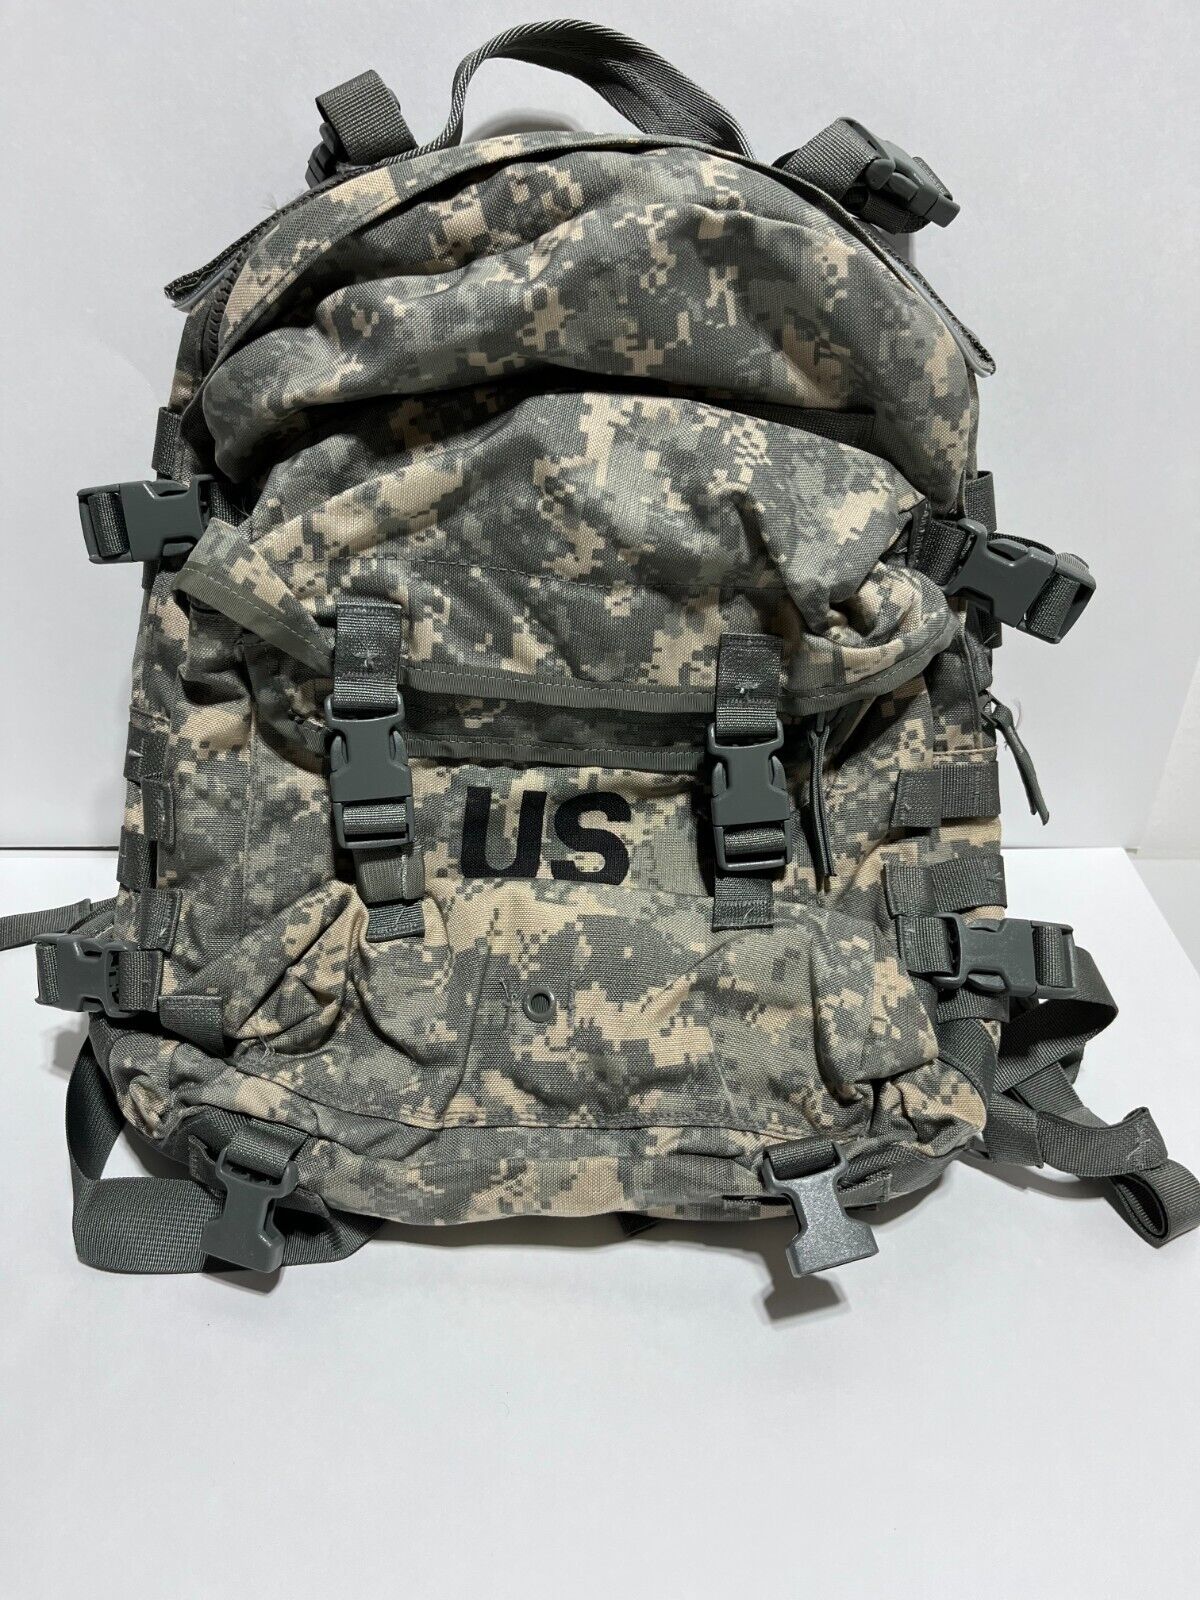 US MILITARY MOLLE II PATROL ASSAULT PACK W/ STIFFENER  3 DAY BACKPACK |ACU